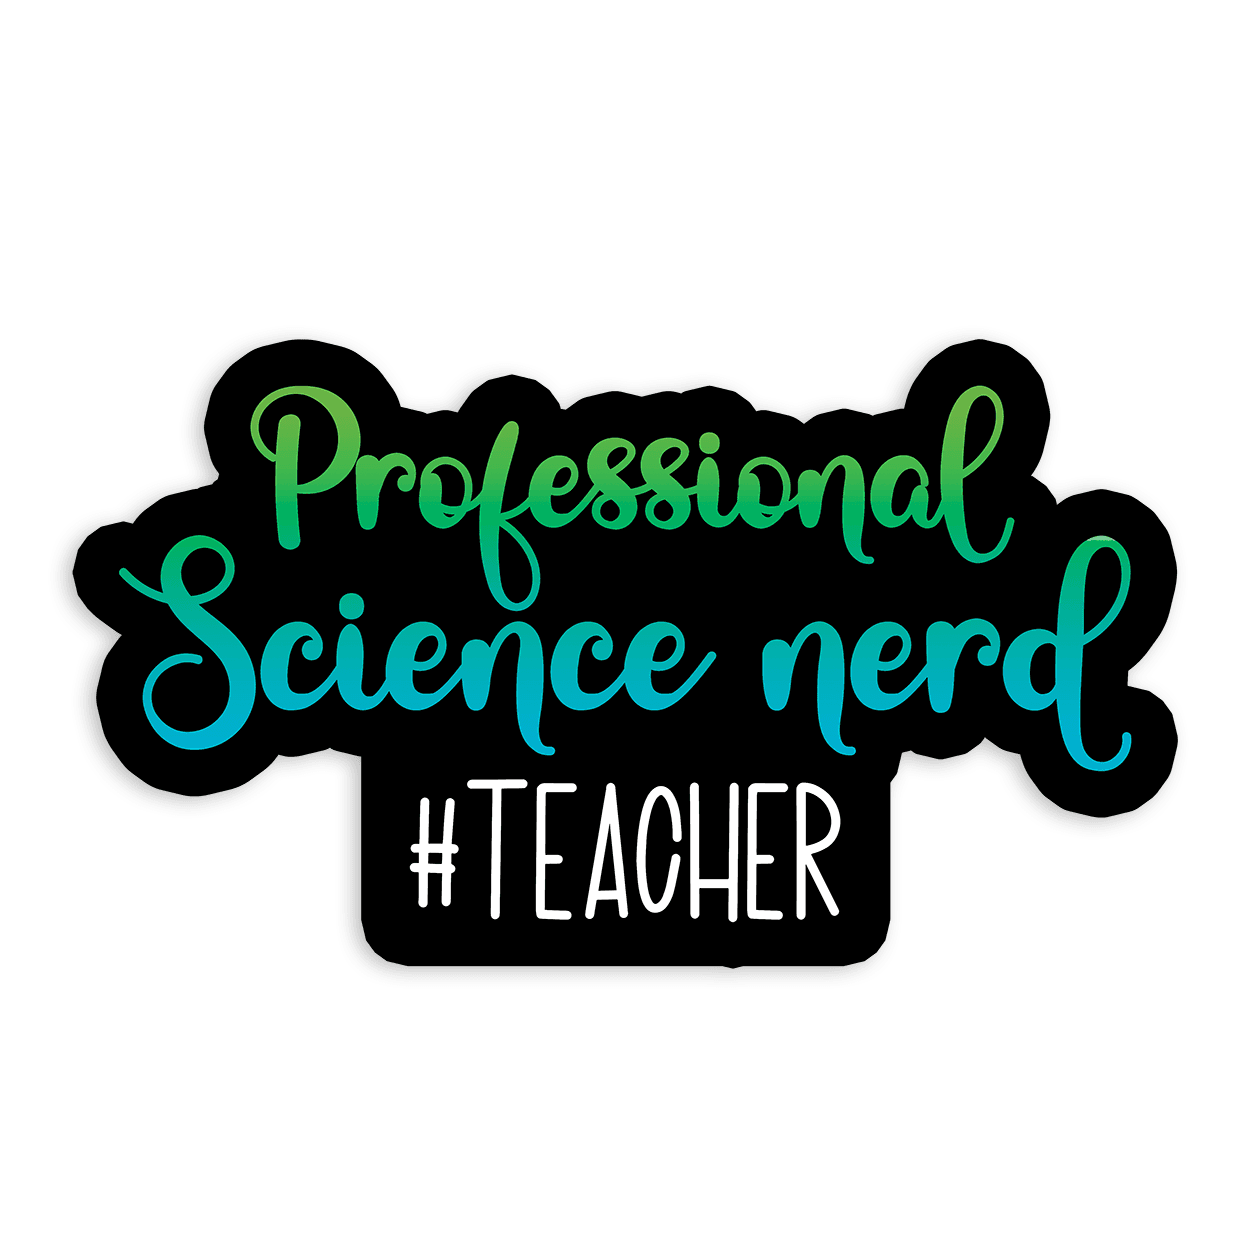 Image of a vinyl sticker that is 3 inch on its longest side with a teacher theme